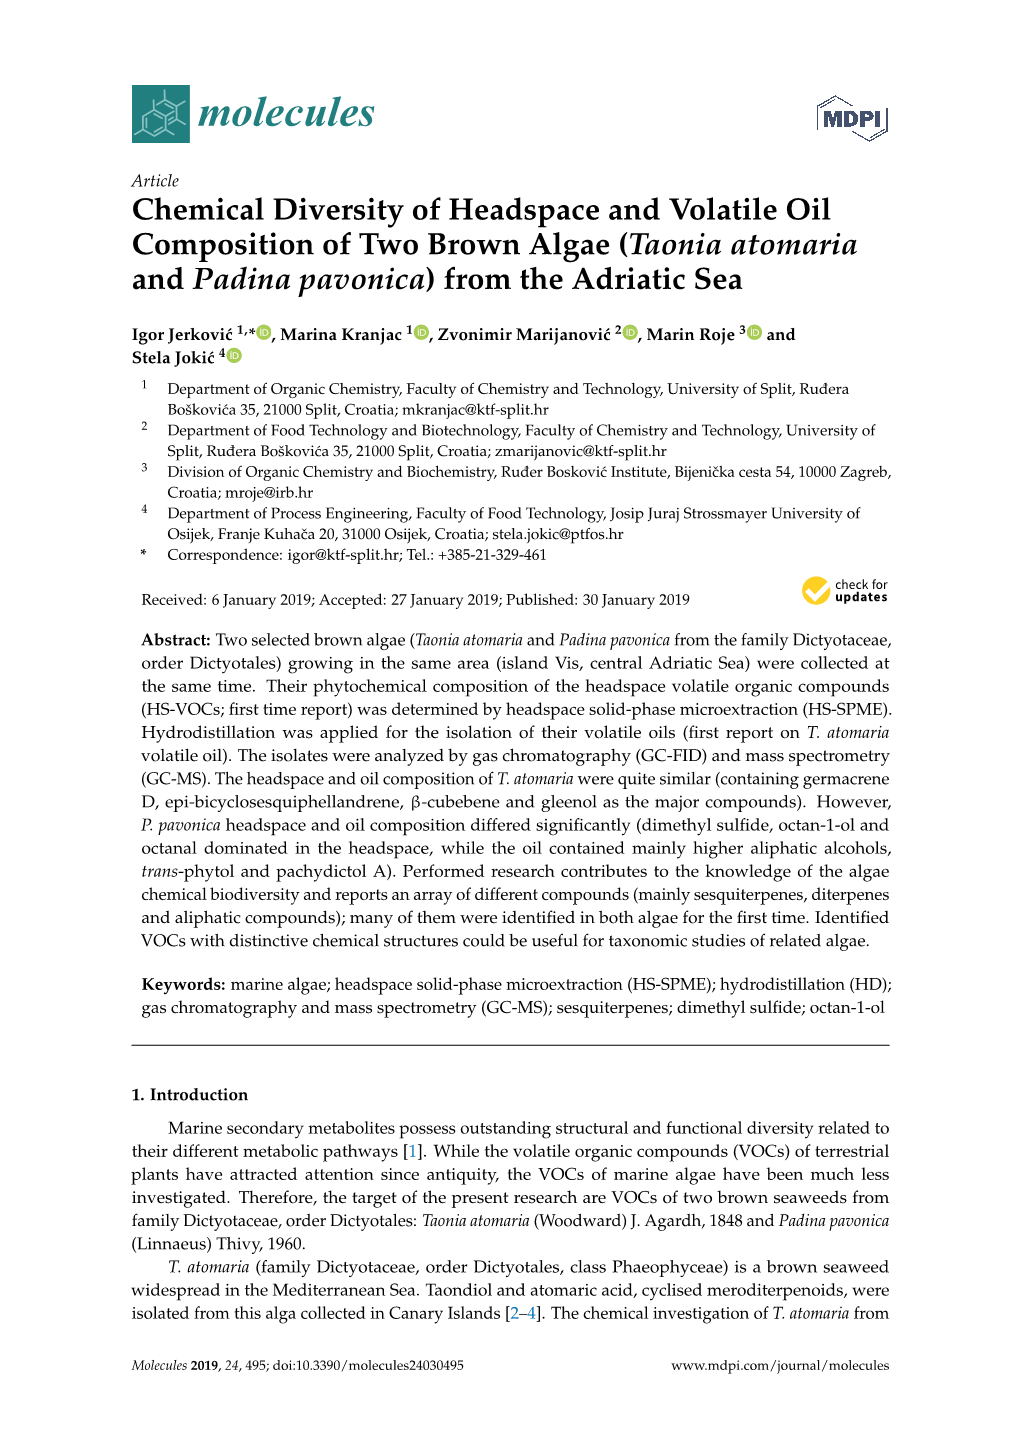 Chemical Diversity of Headspace and Volatile Oil Composition of Two Brown Algae (Taonia Atomaria and Padina Pavonica) from the Adriatic Sea